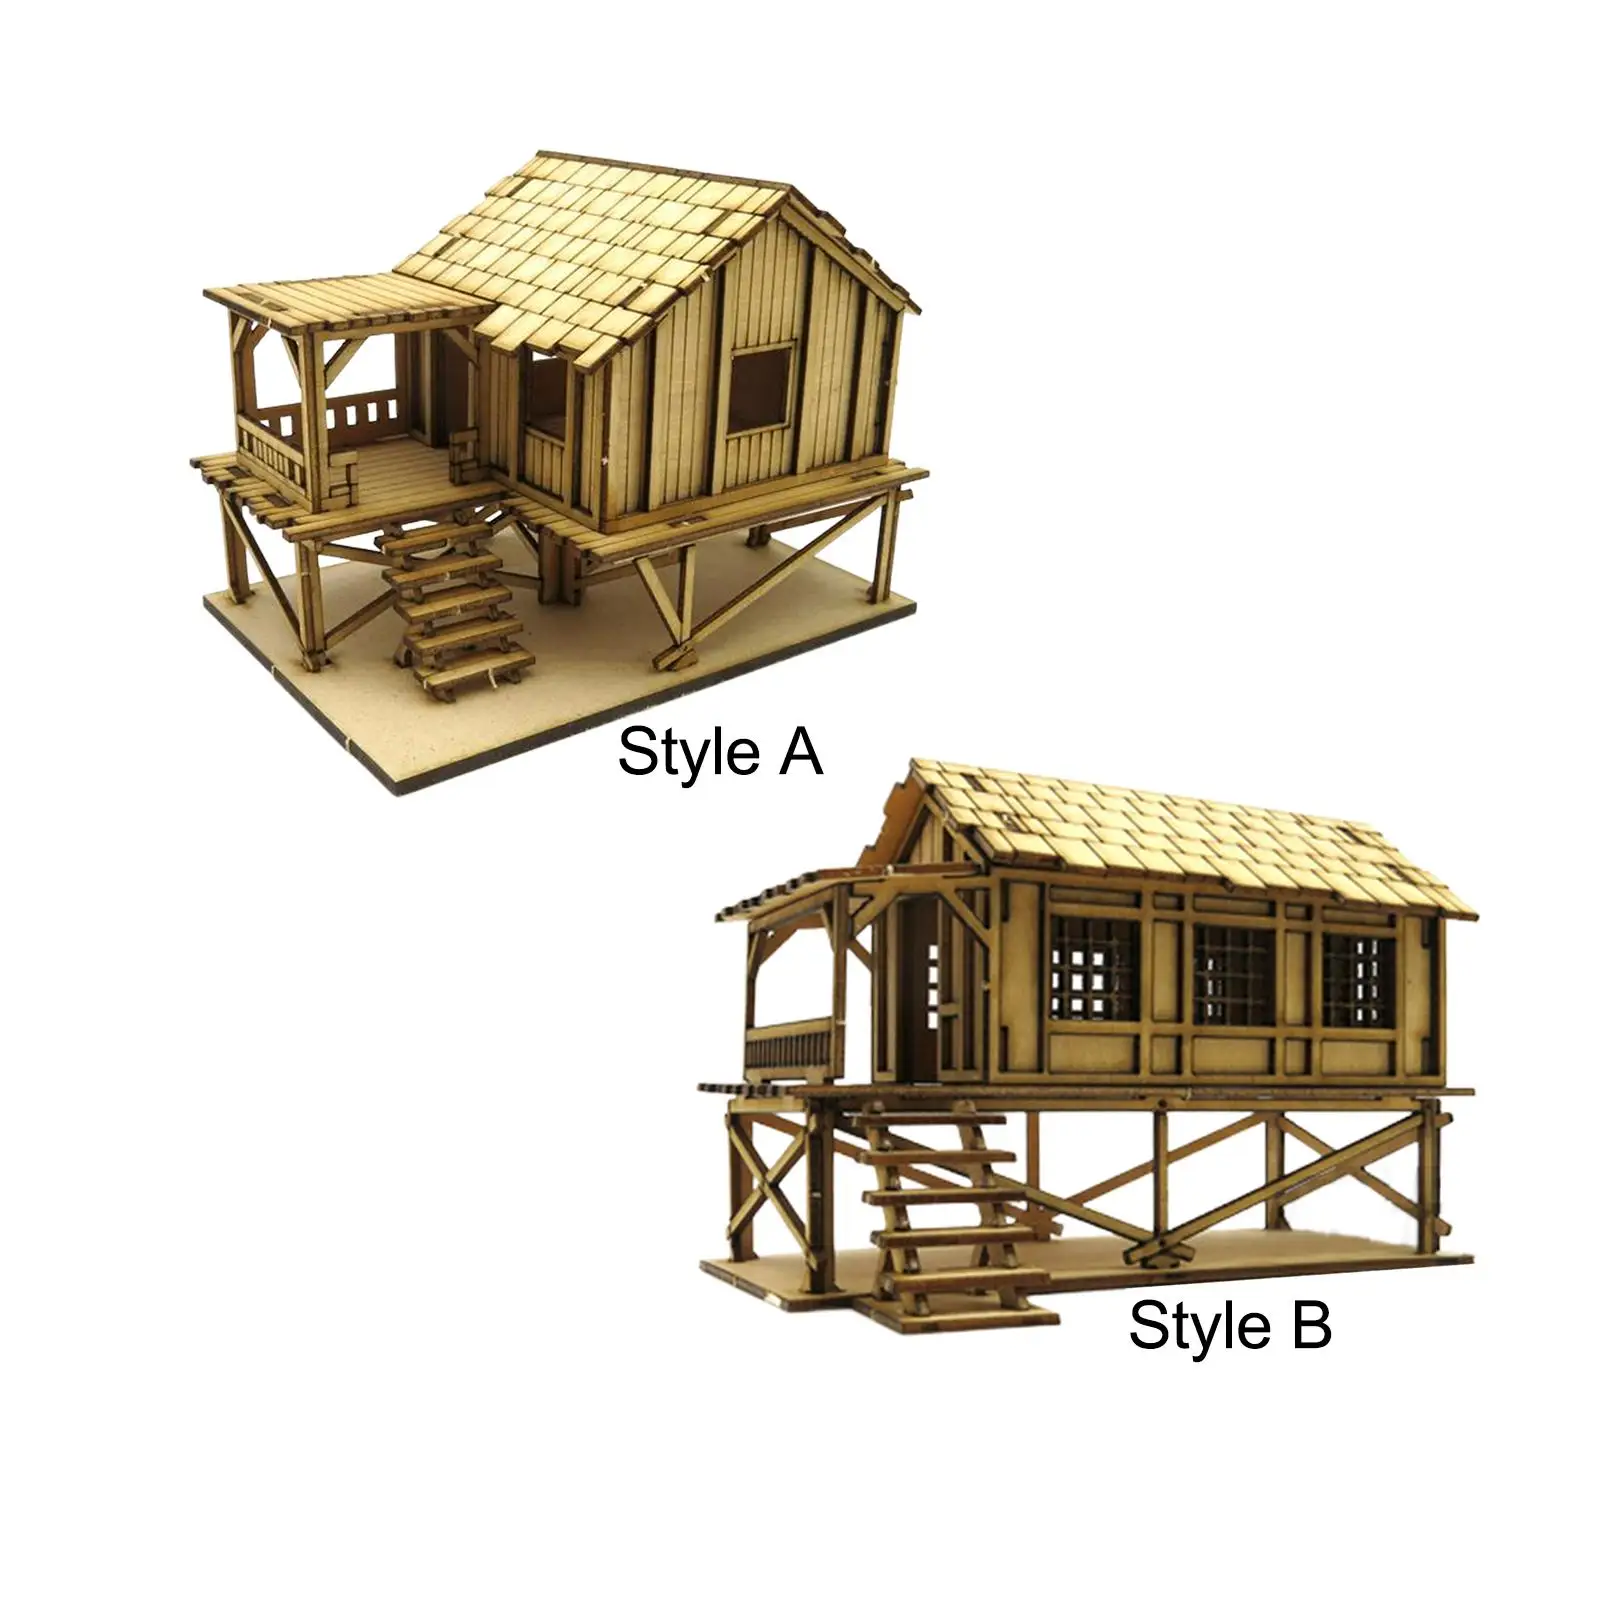 

3D Wooden Puzzle Hobby Toys 3D Puzzles DIY Crafts House 1/72 Wooden Cabin for Diorama Model Railway Micro Landscape Sand Table